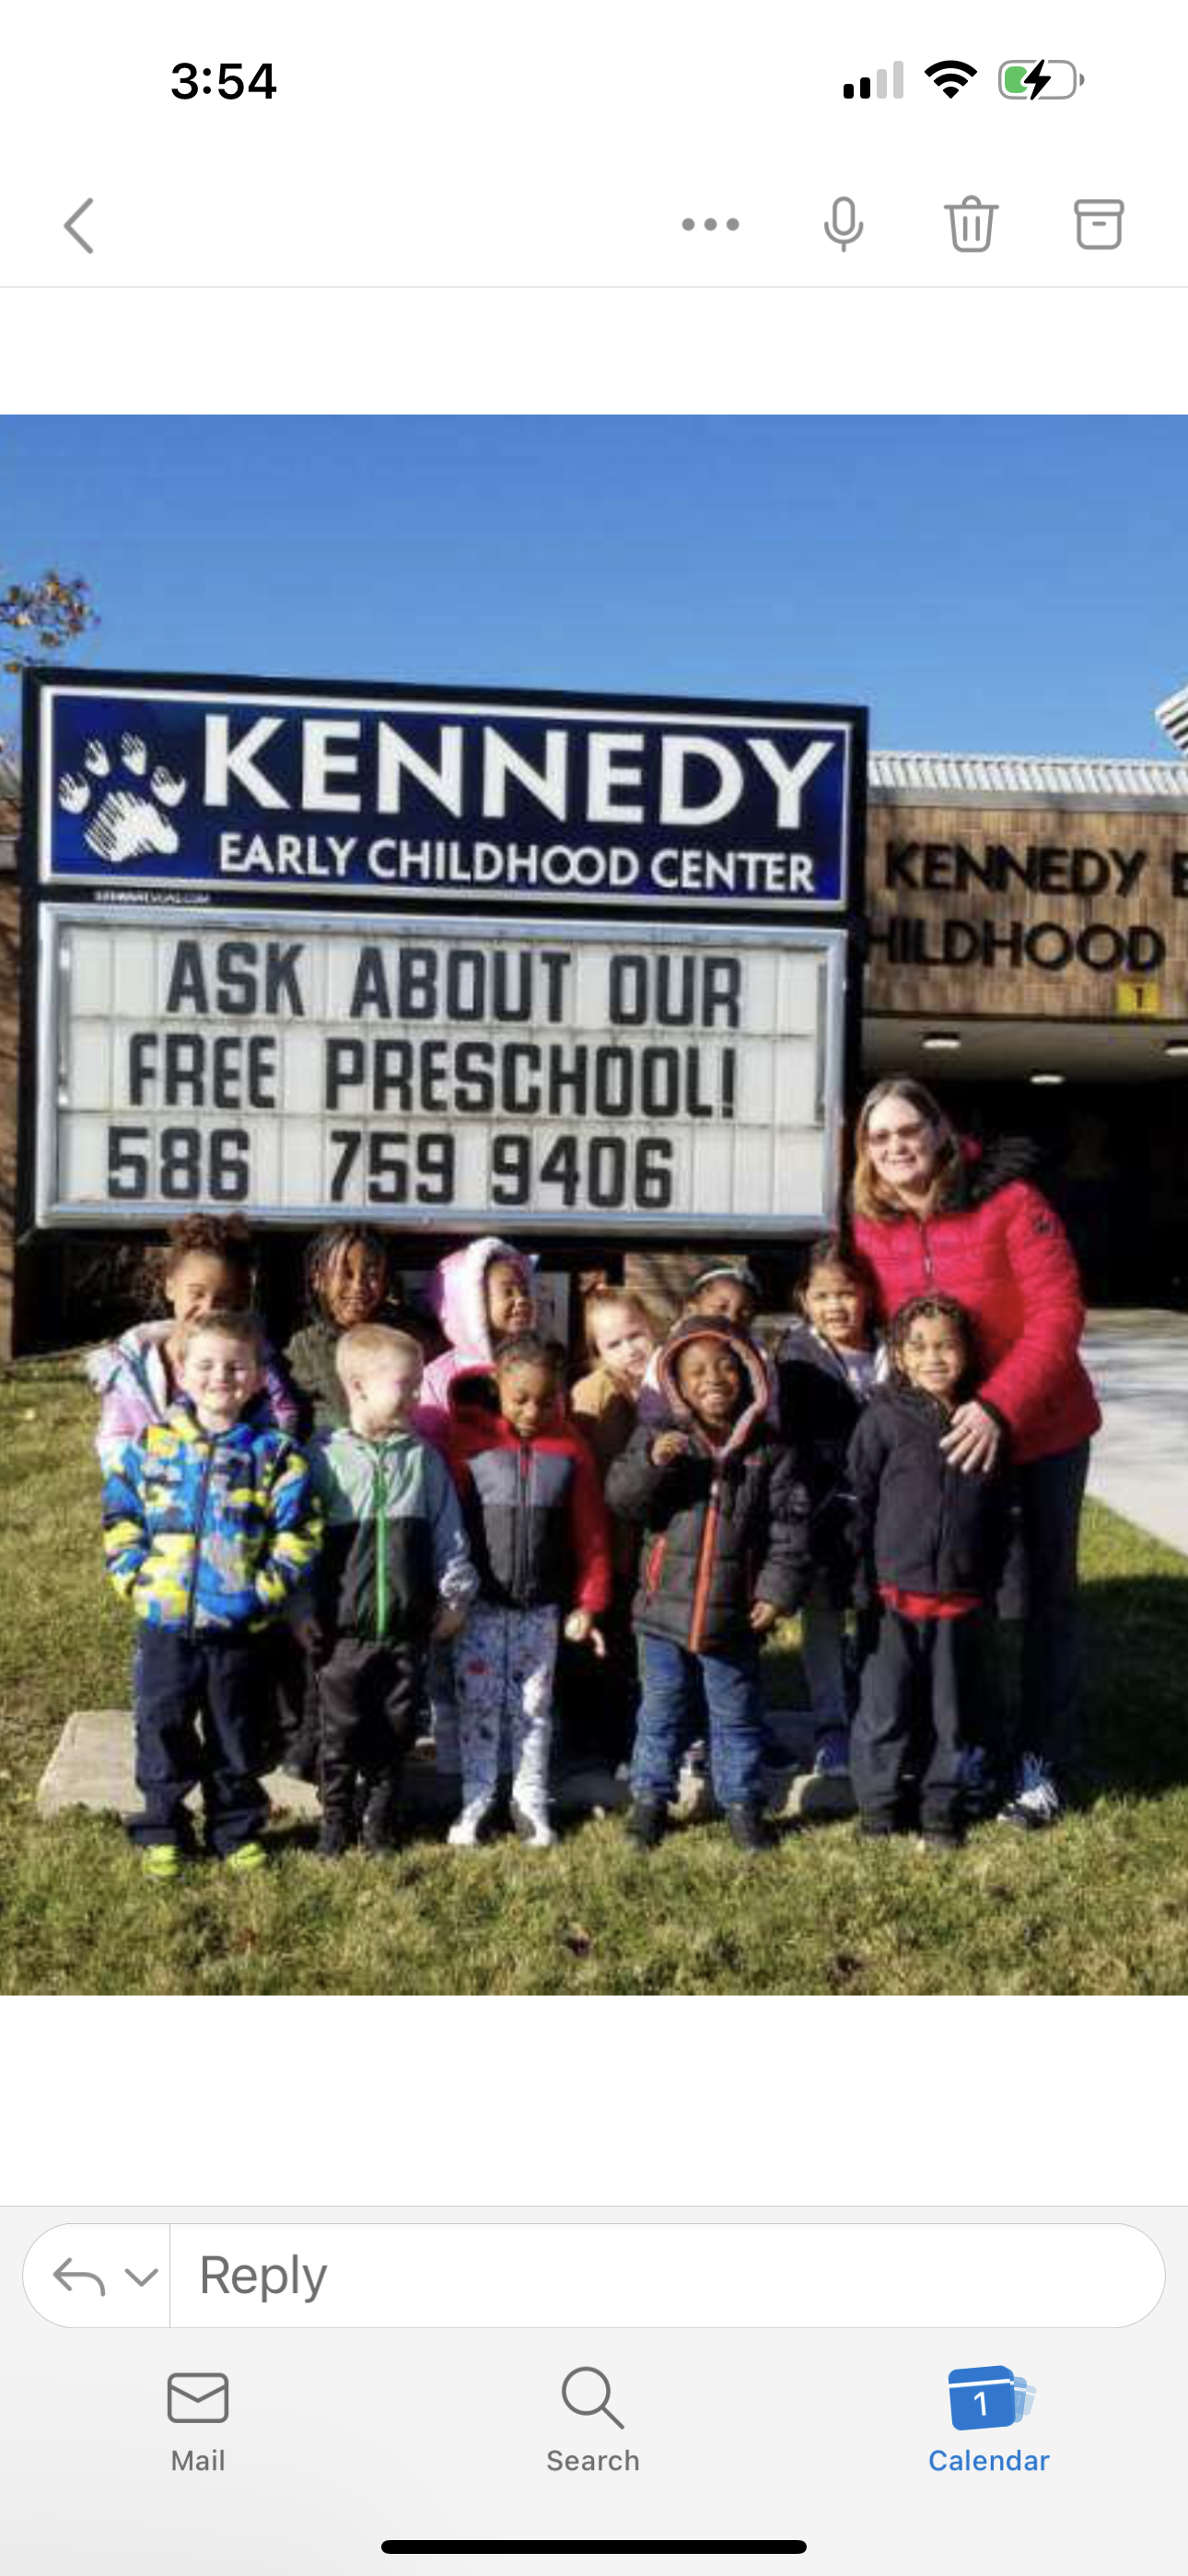 Welcome to Kennedy Early Childhood Center